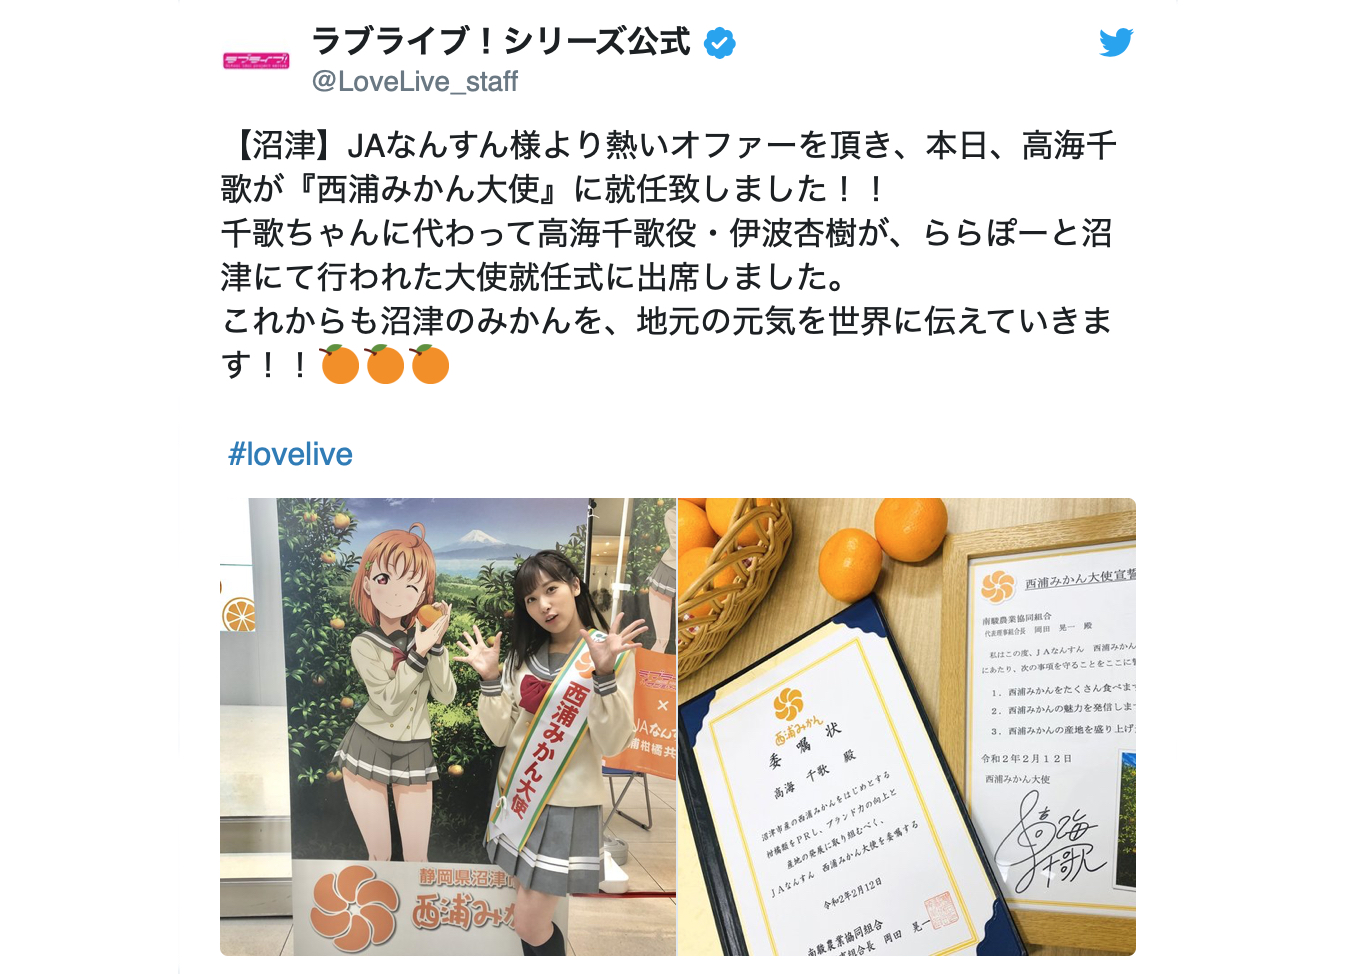 Love Live Poster Showing Anime Schoolgirl In See Through Skirt Divides Public Opinion In Japan Soranews24 Japan News